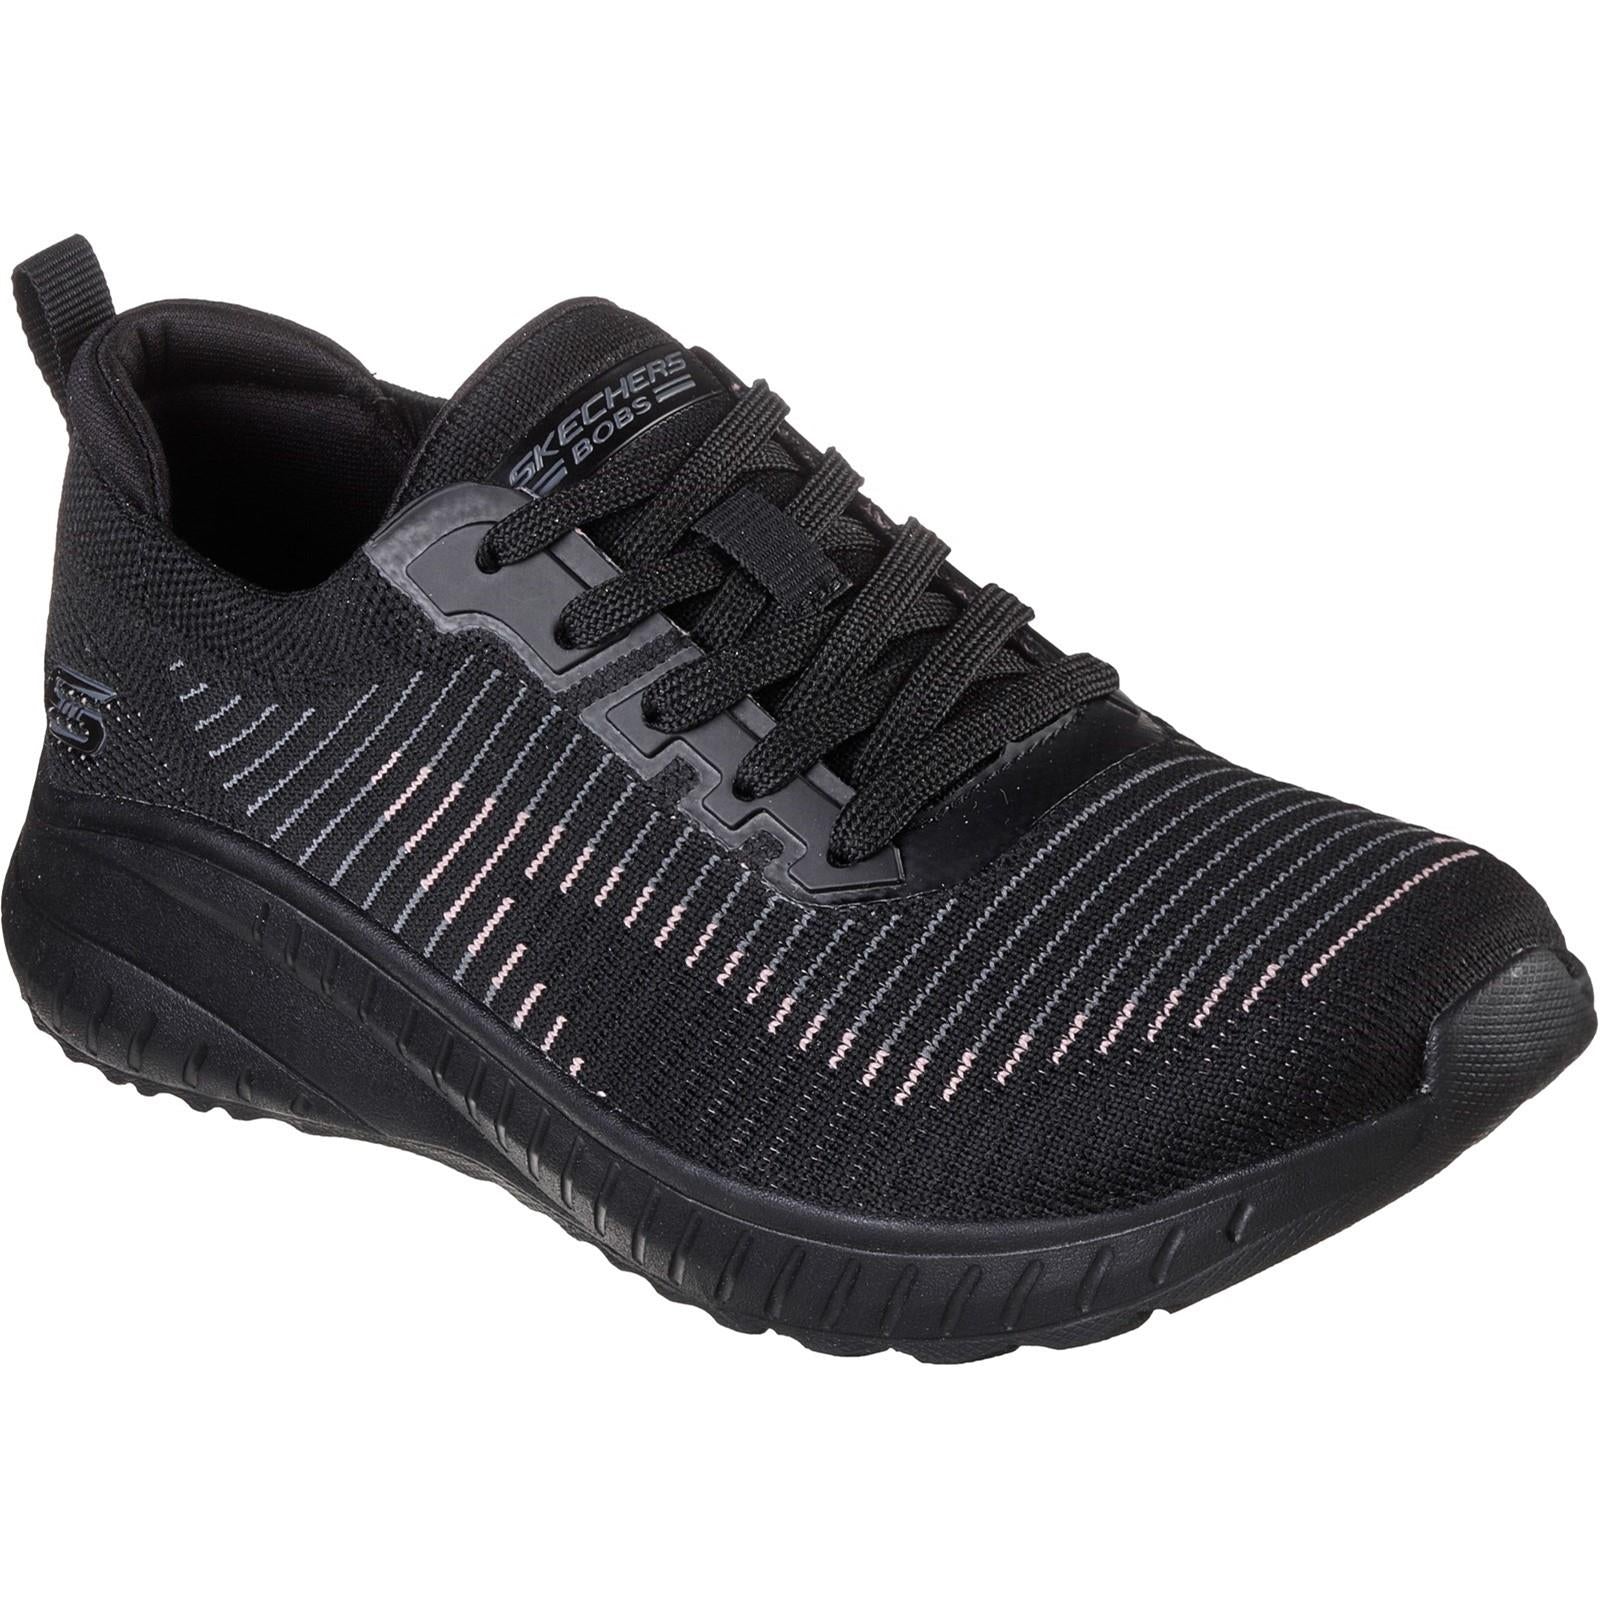 Skechers BOBS Squad Chaos Renegade Parade black memory foam trainers shoes